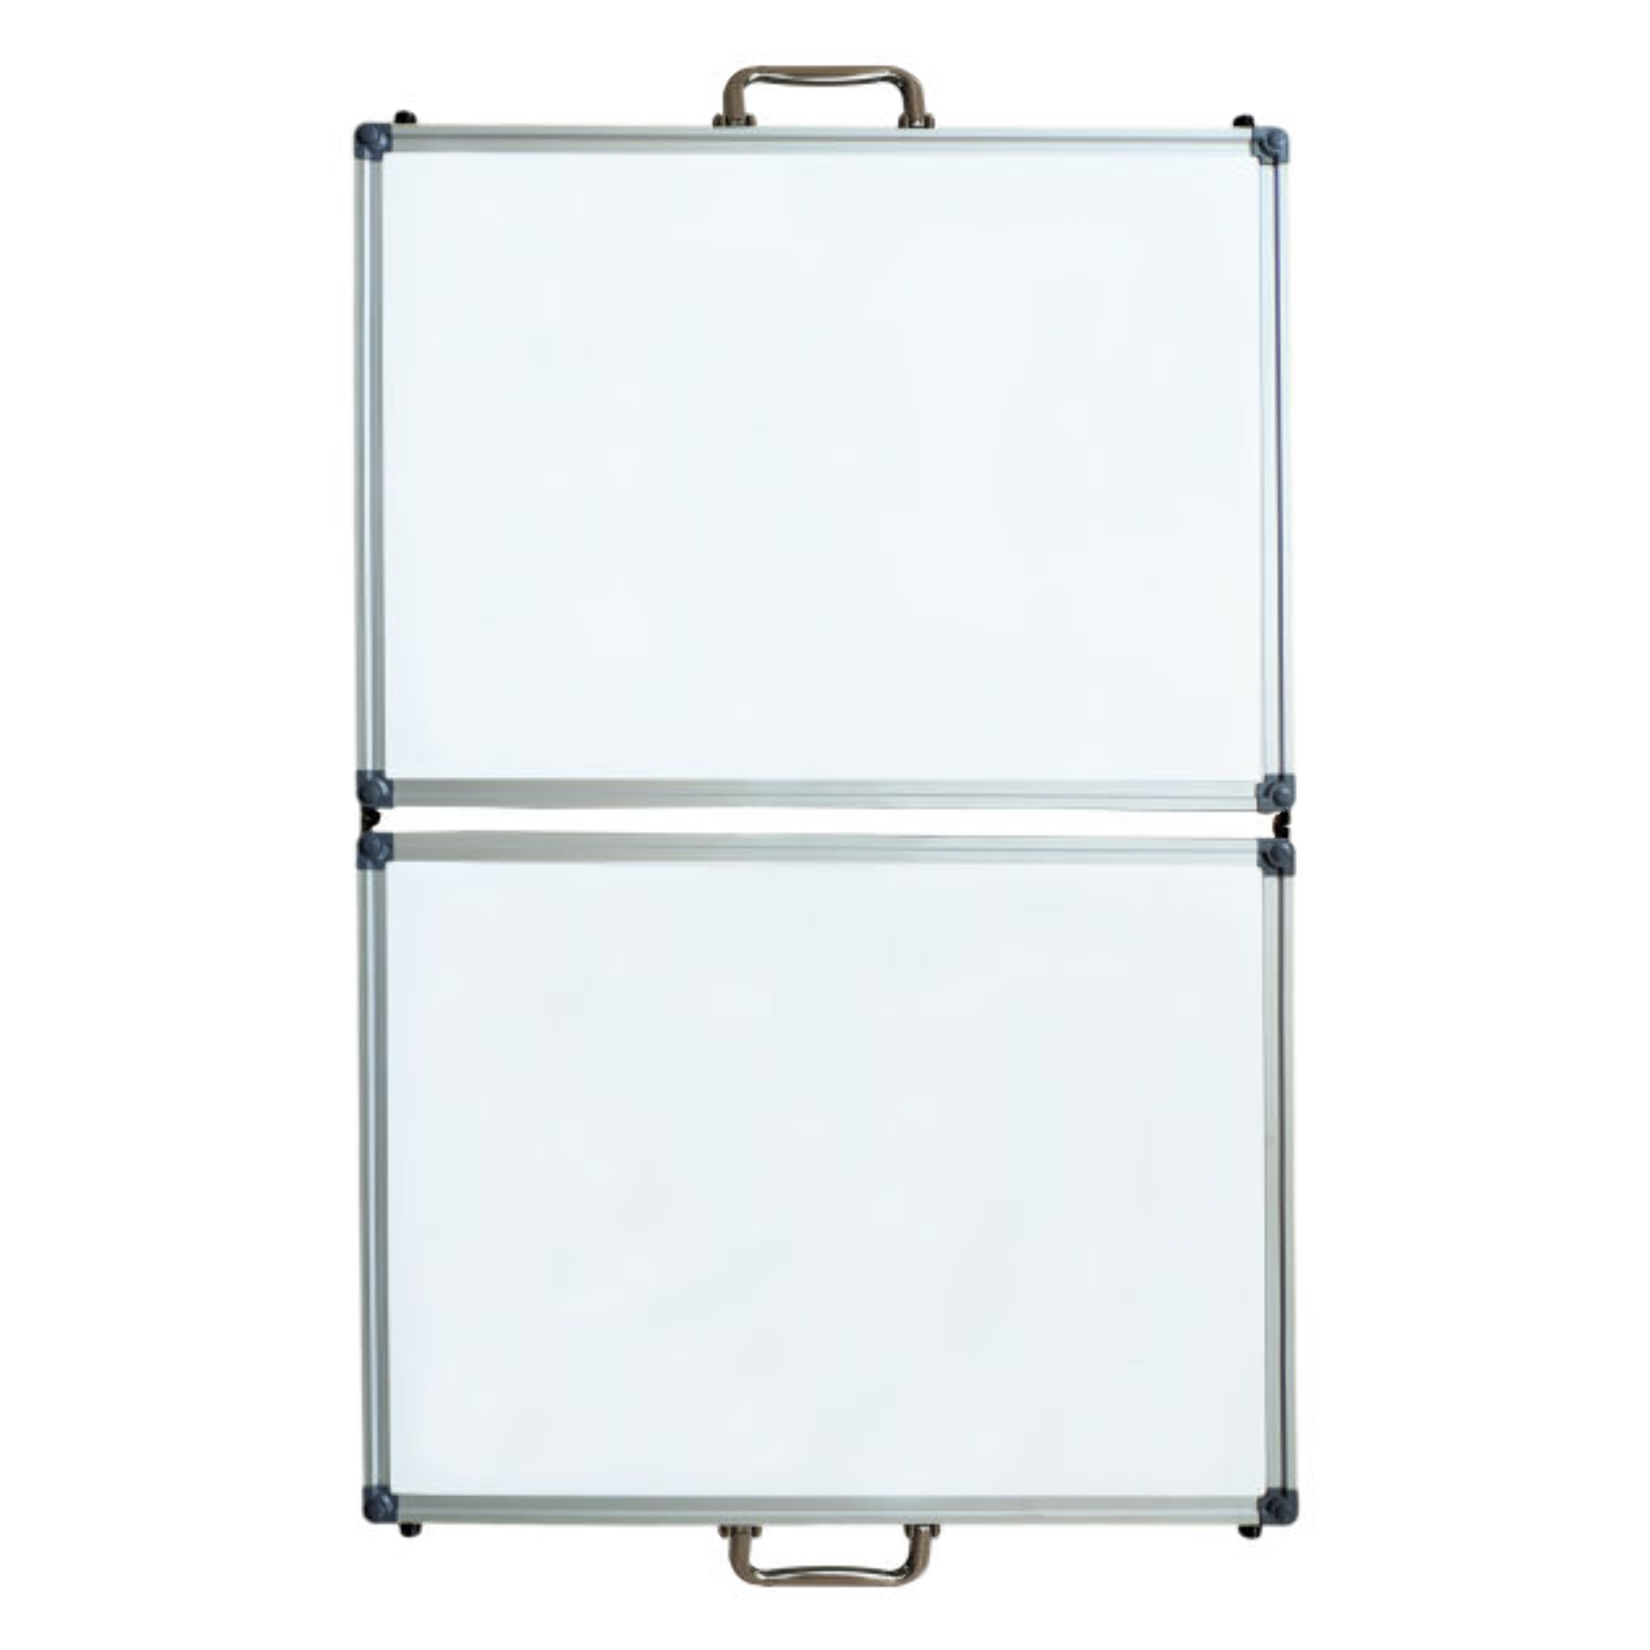 Folding Magnetic Board 90x60cm (without Printing)